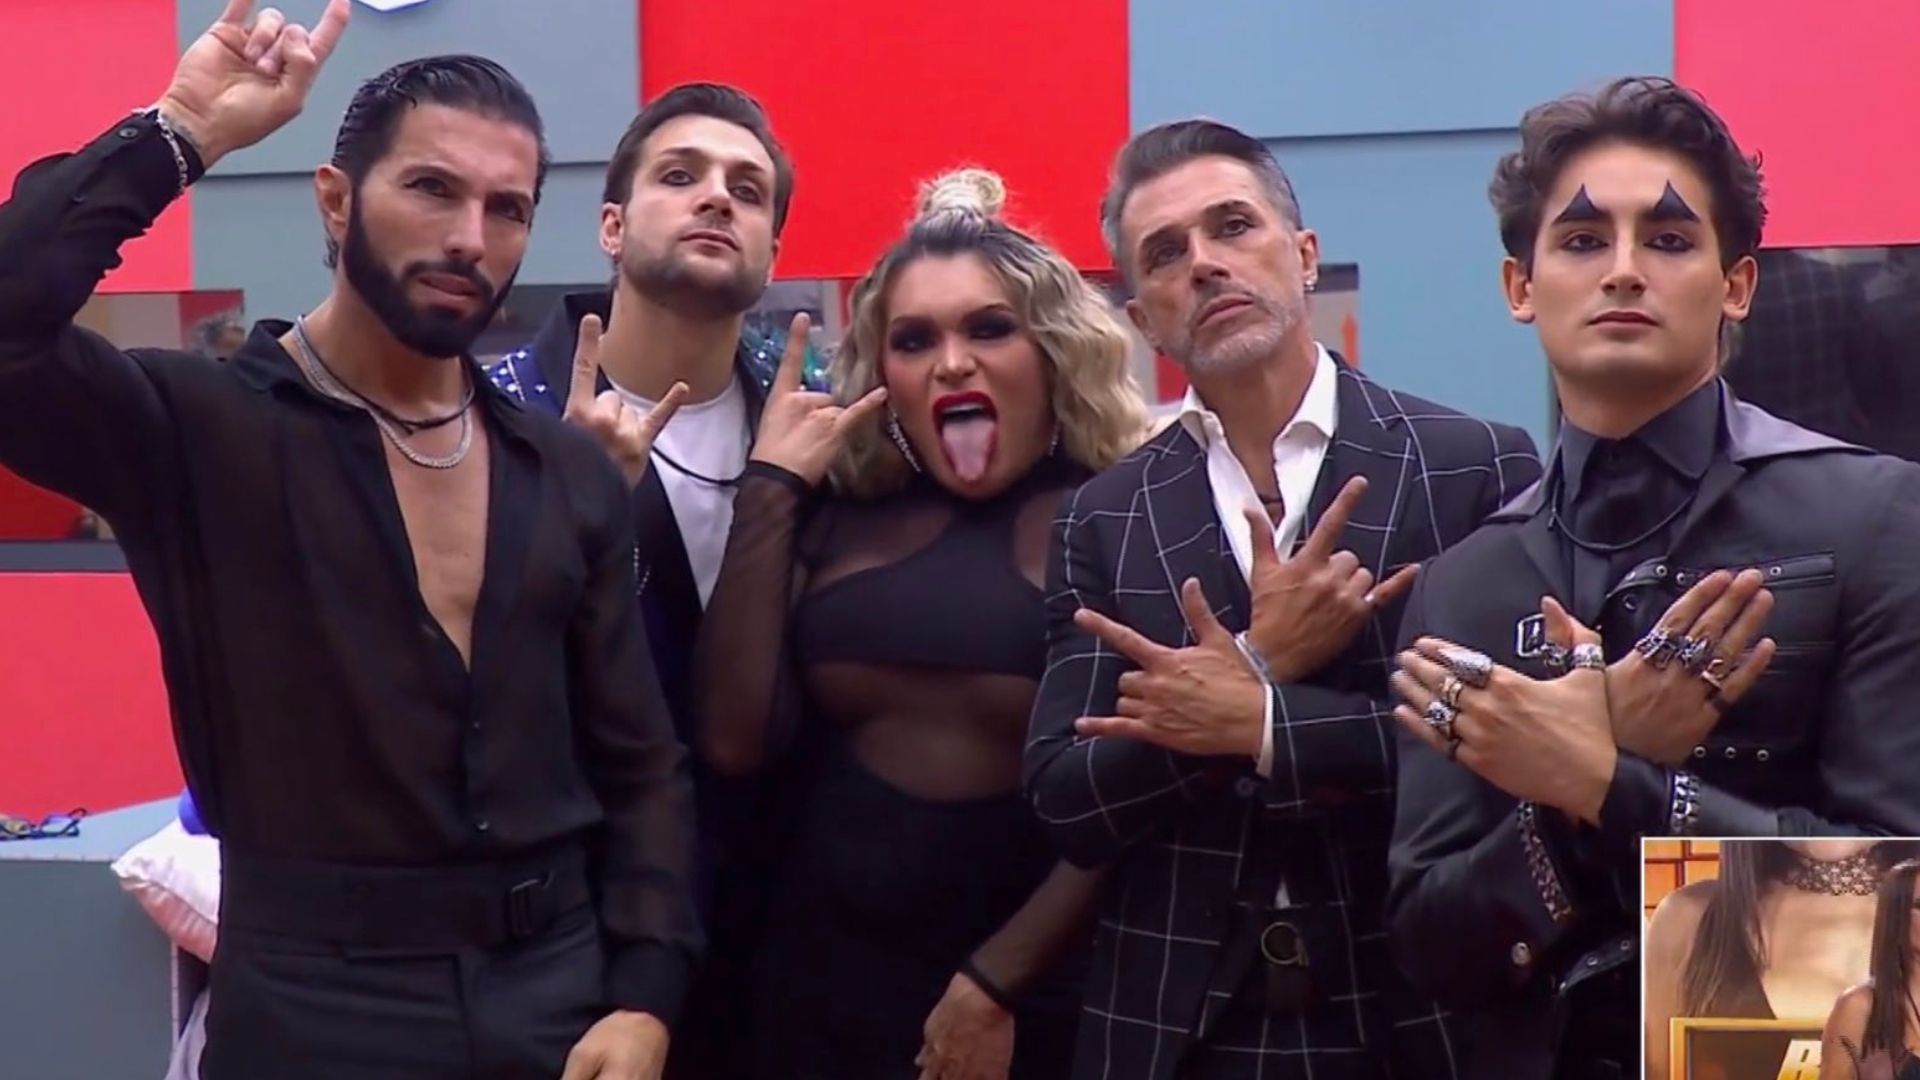 Team Infierno reaches the final, but only with four members (Screenshot)